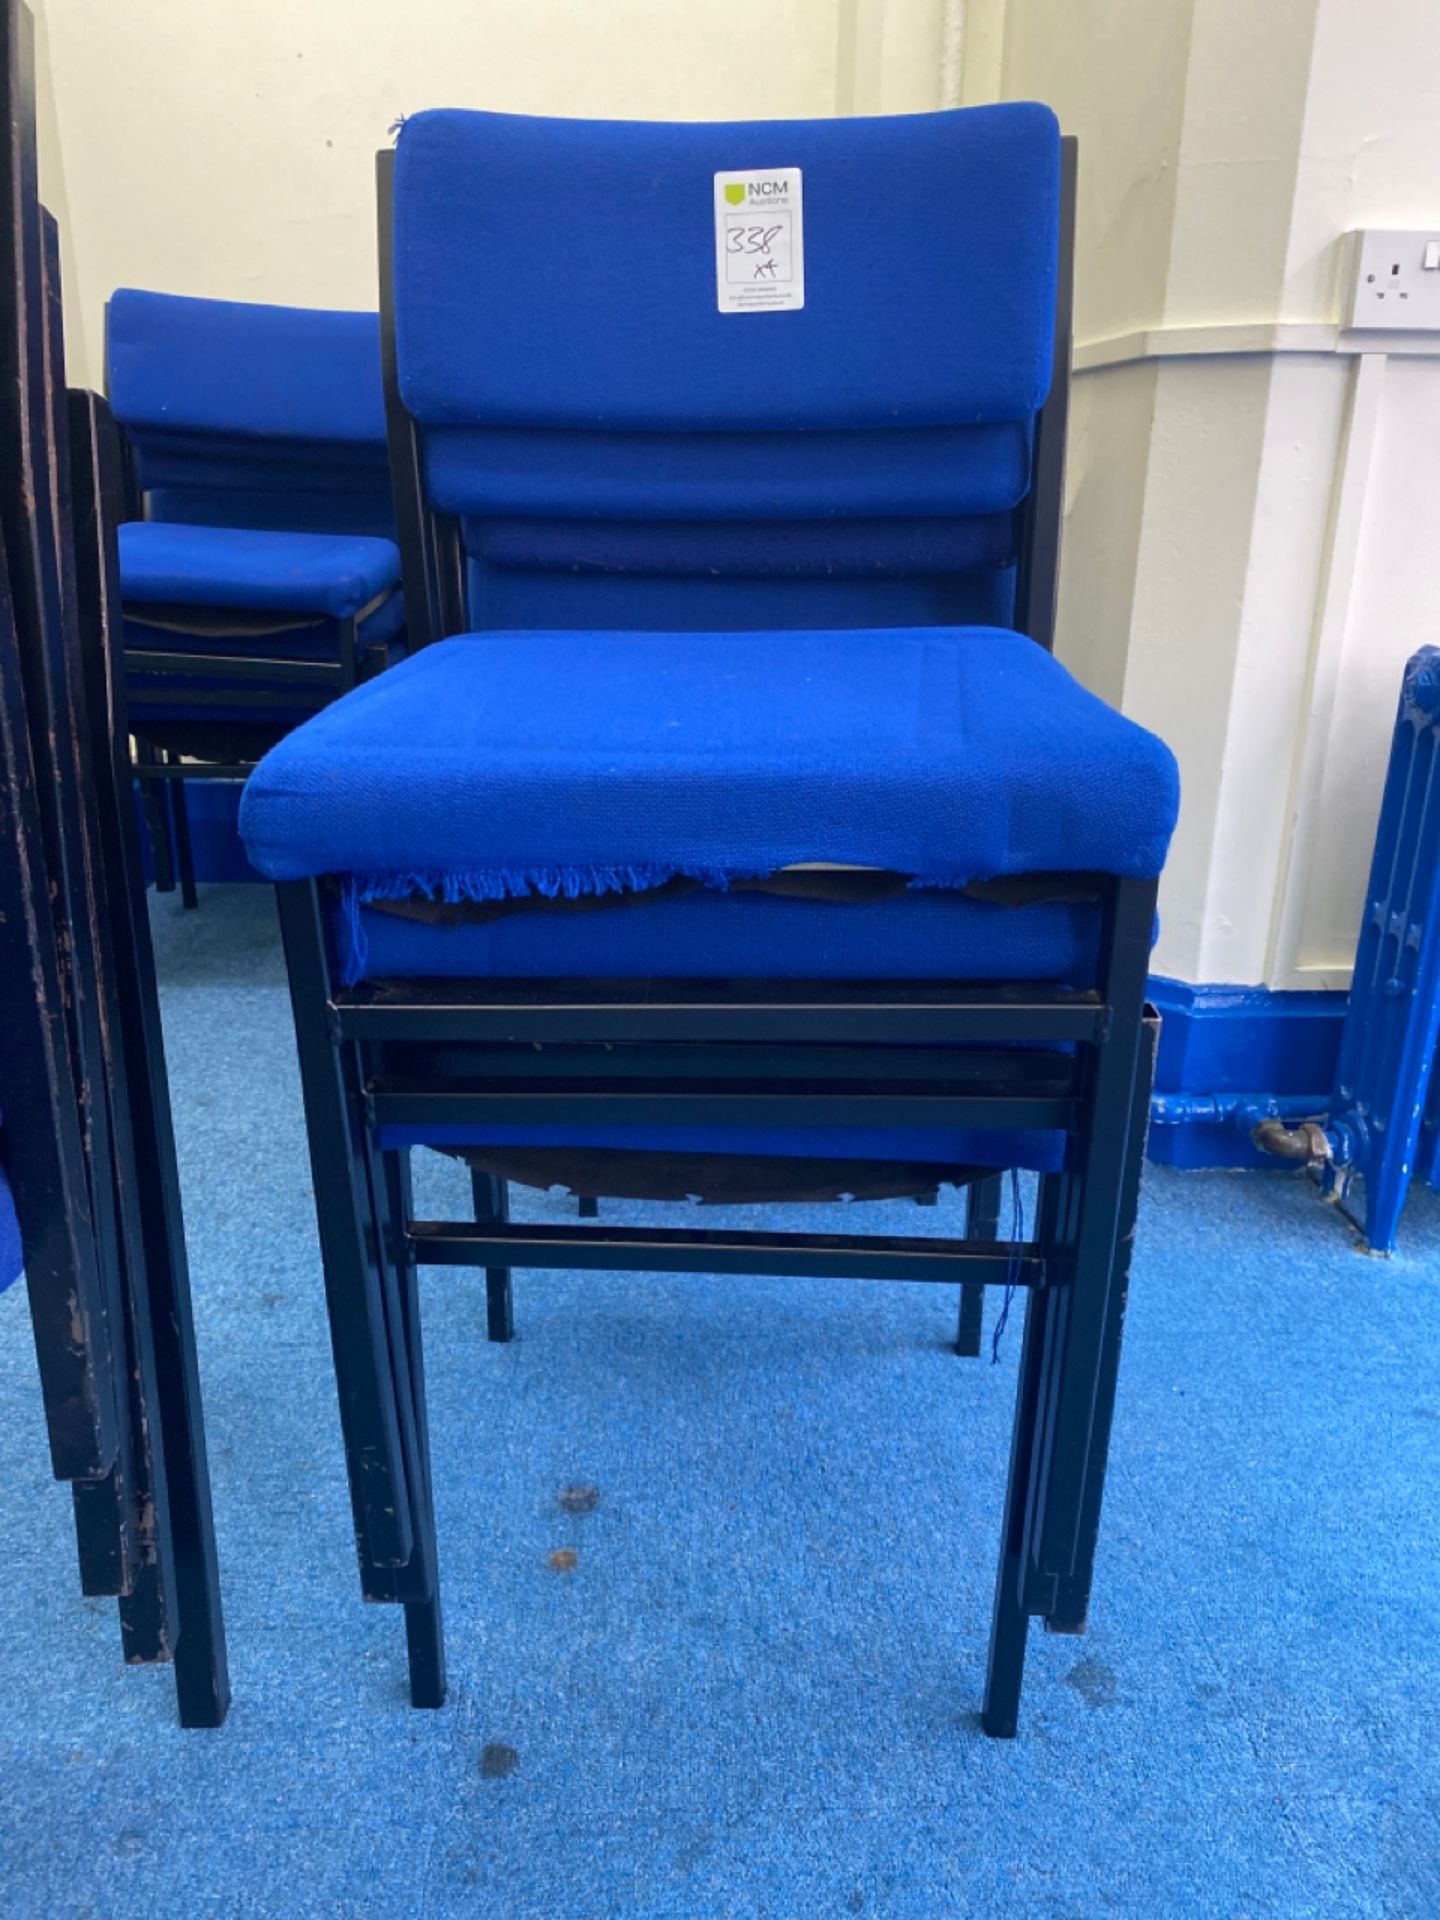 Set of 4 Cusioned Classroom Chairs - Image 14 of 14